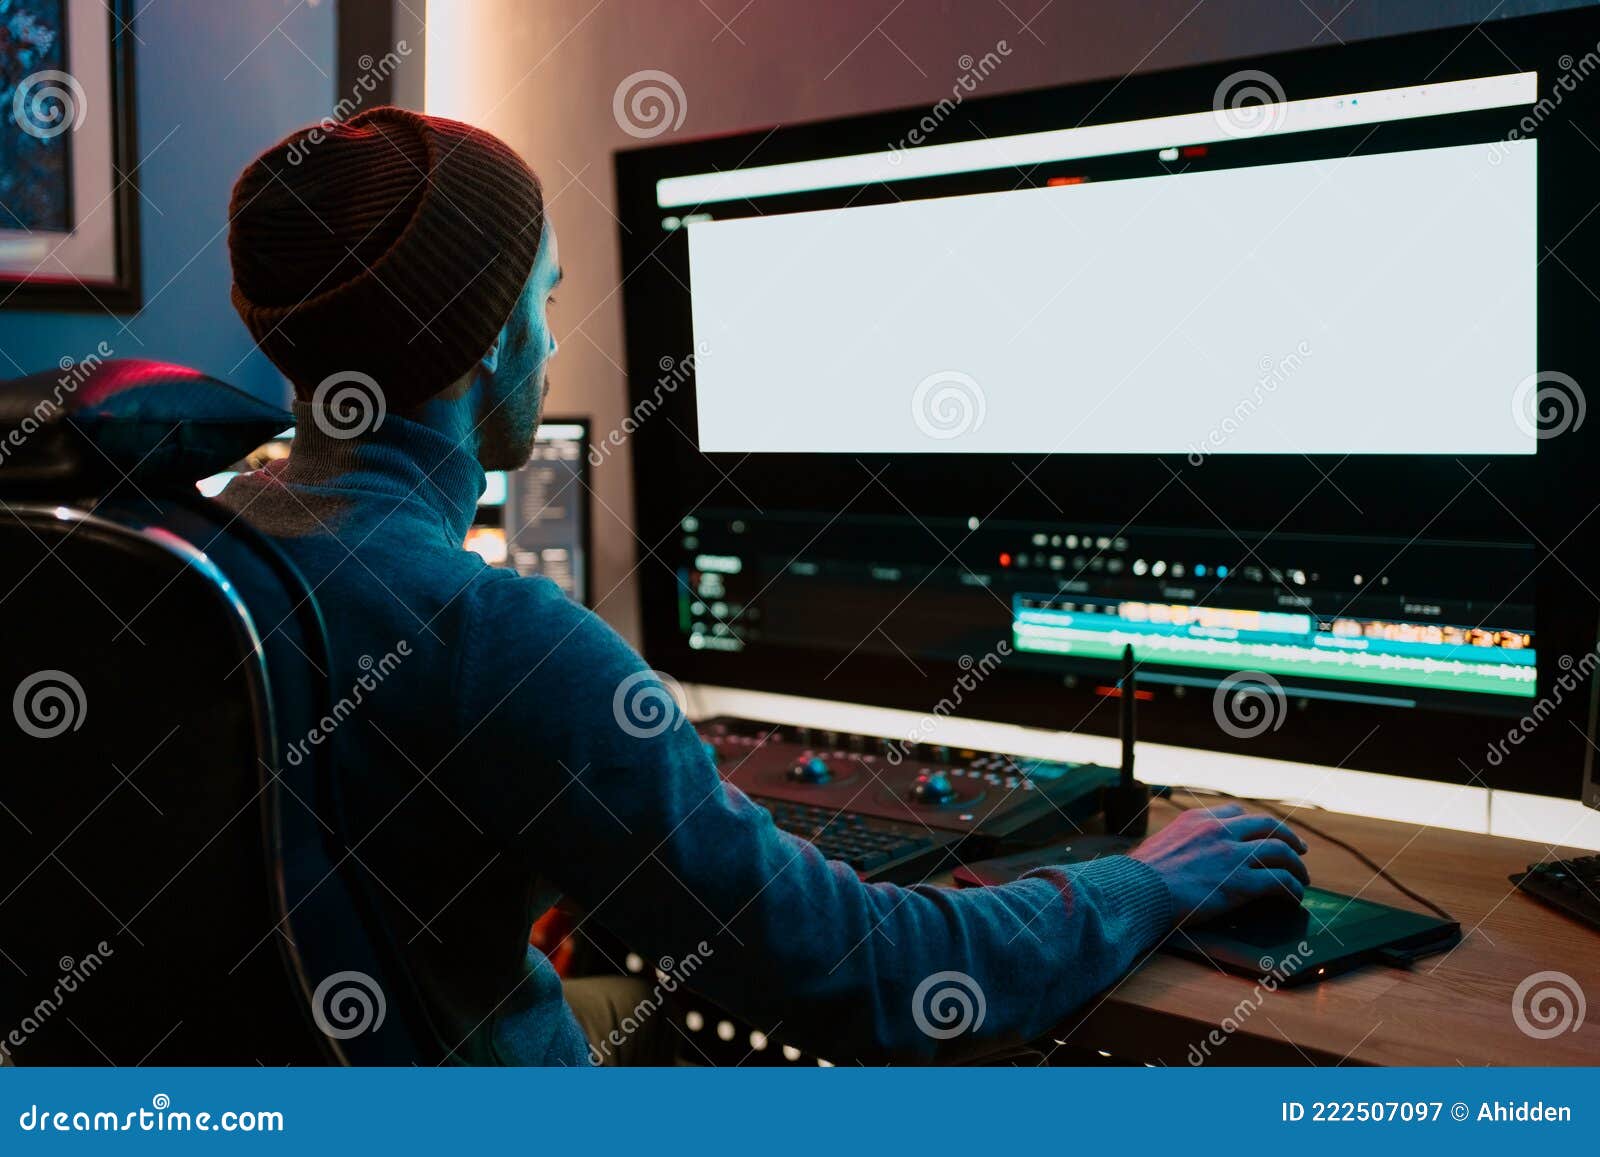 male video editor working on his personal computer with big blank display